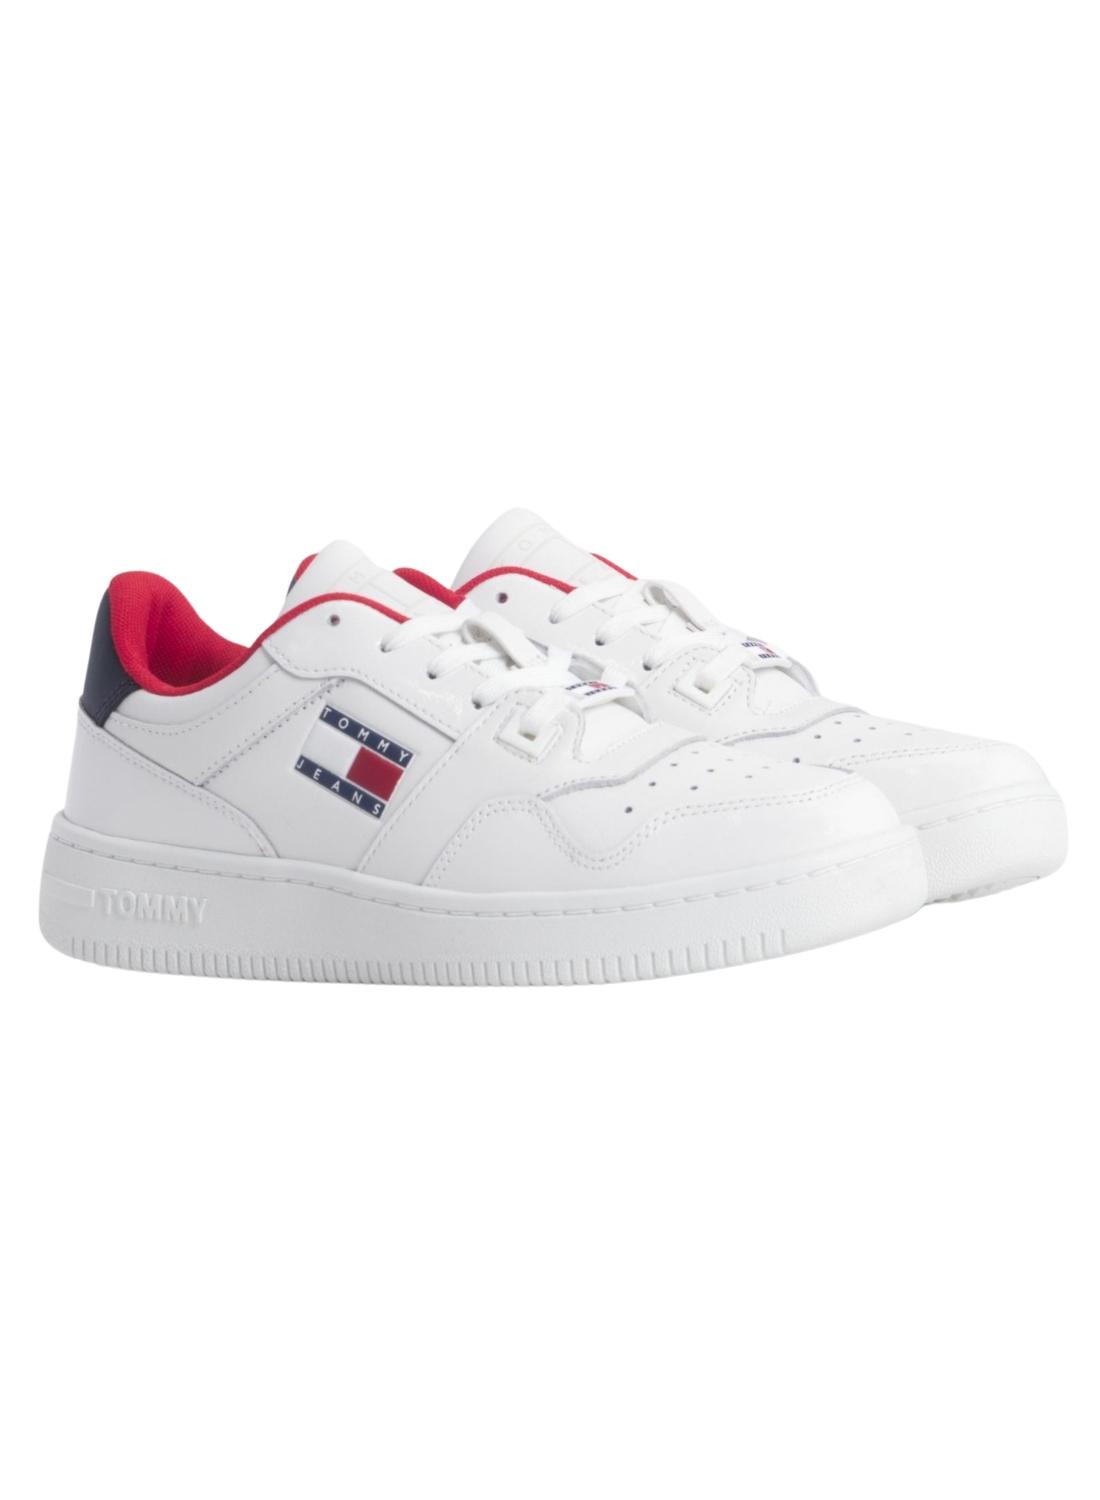 Sneakers Tommy Jeans Retro Basket Bianco Donna